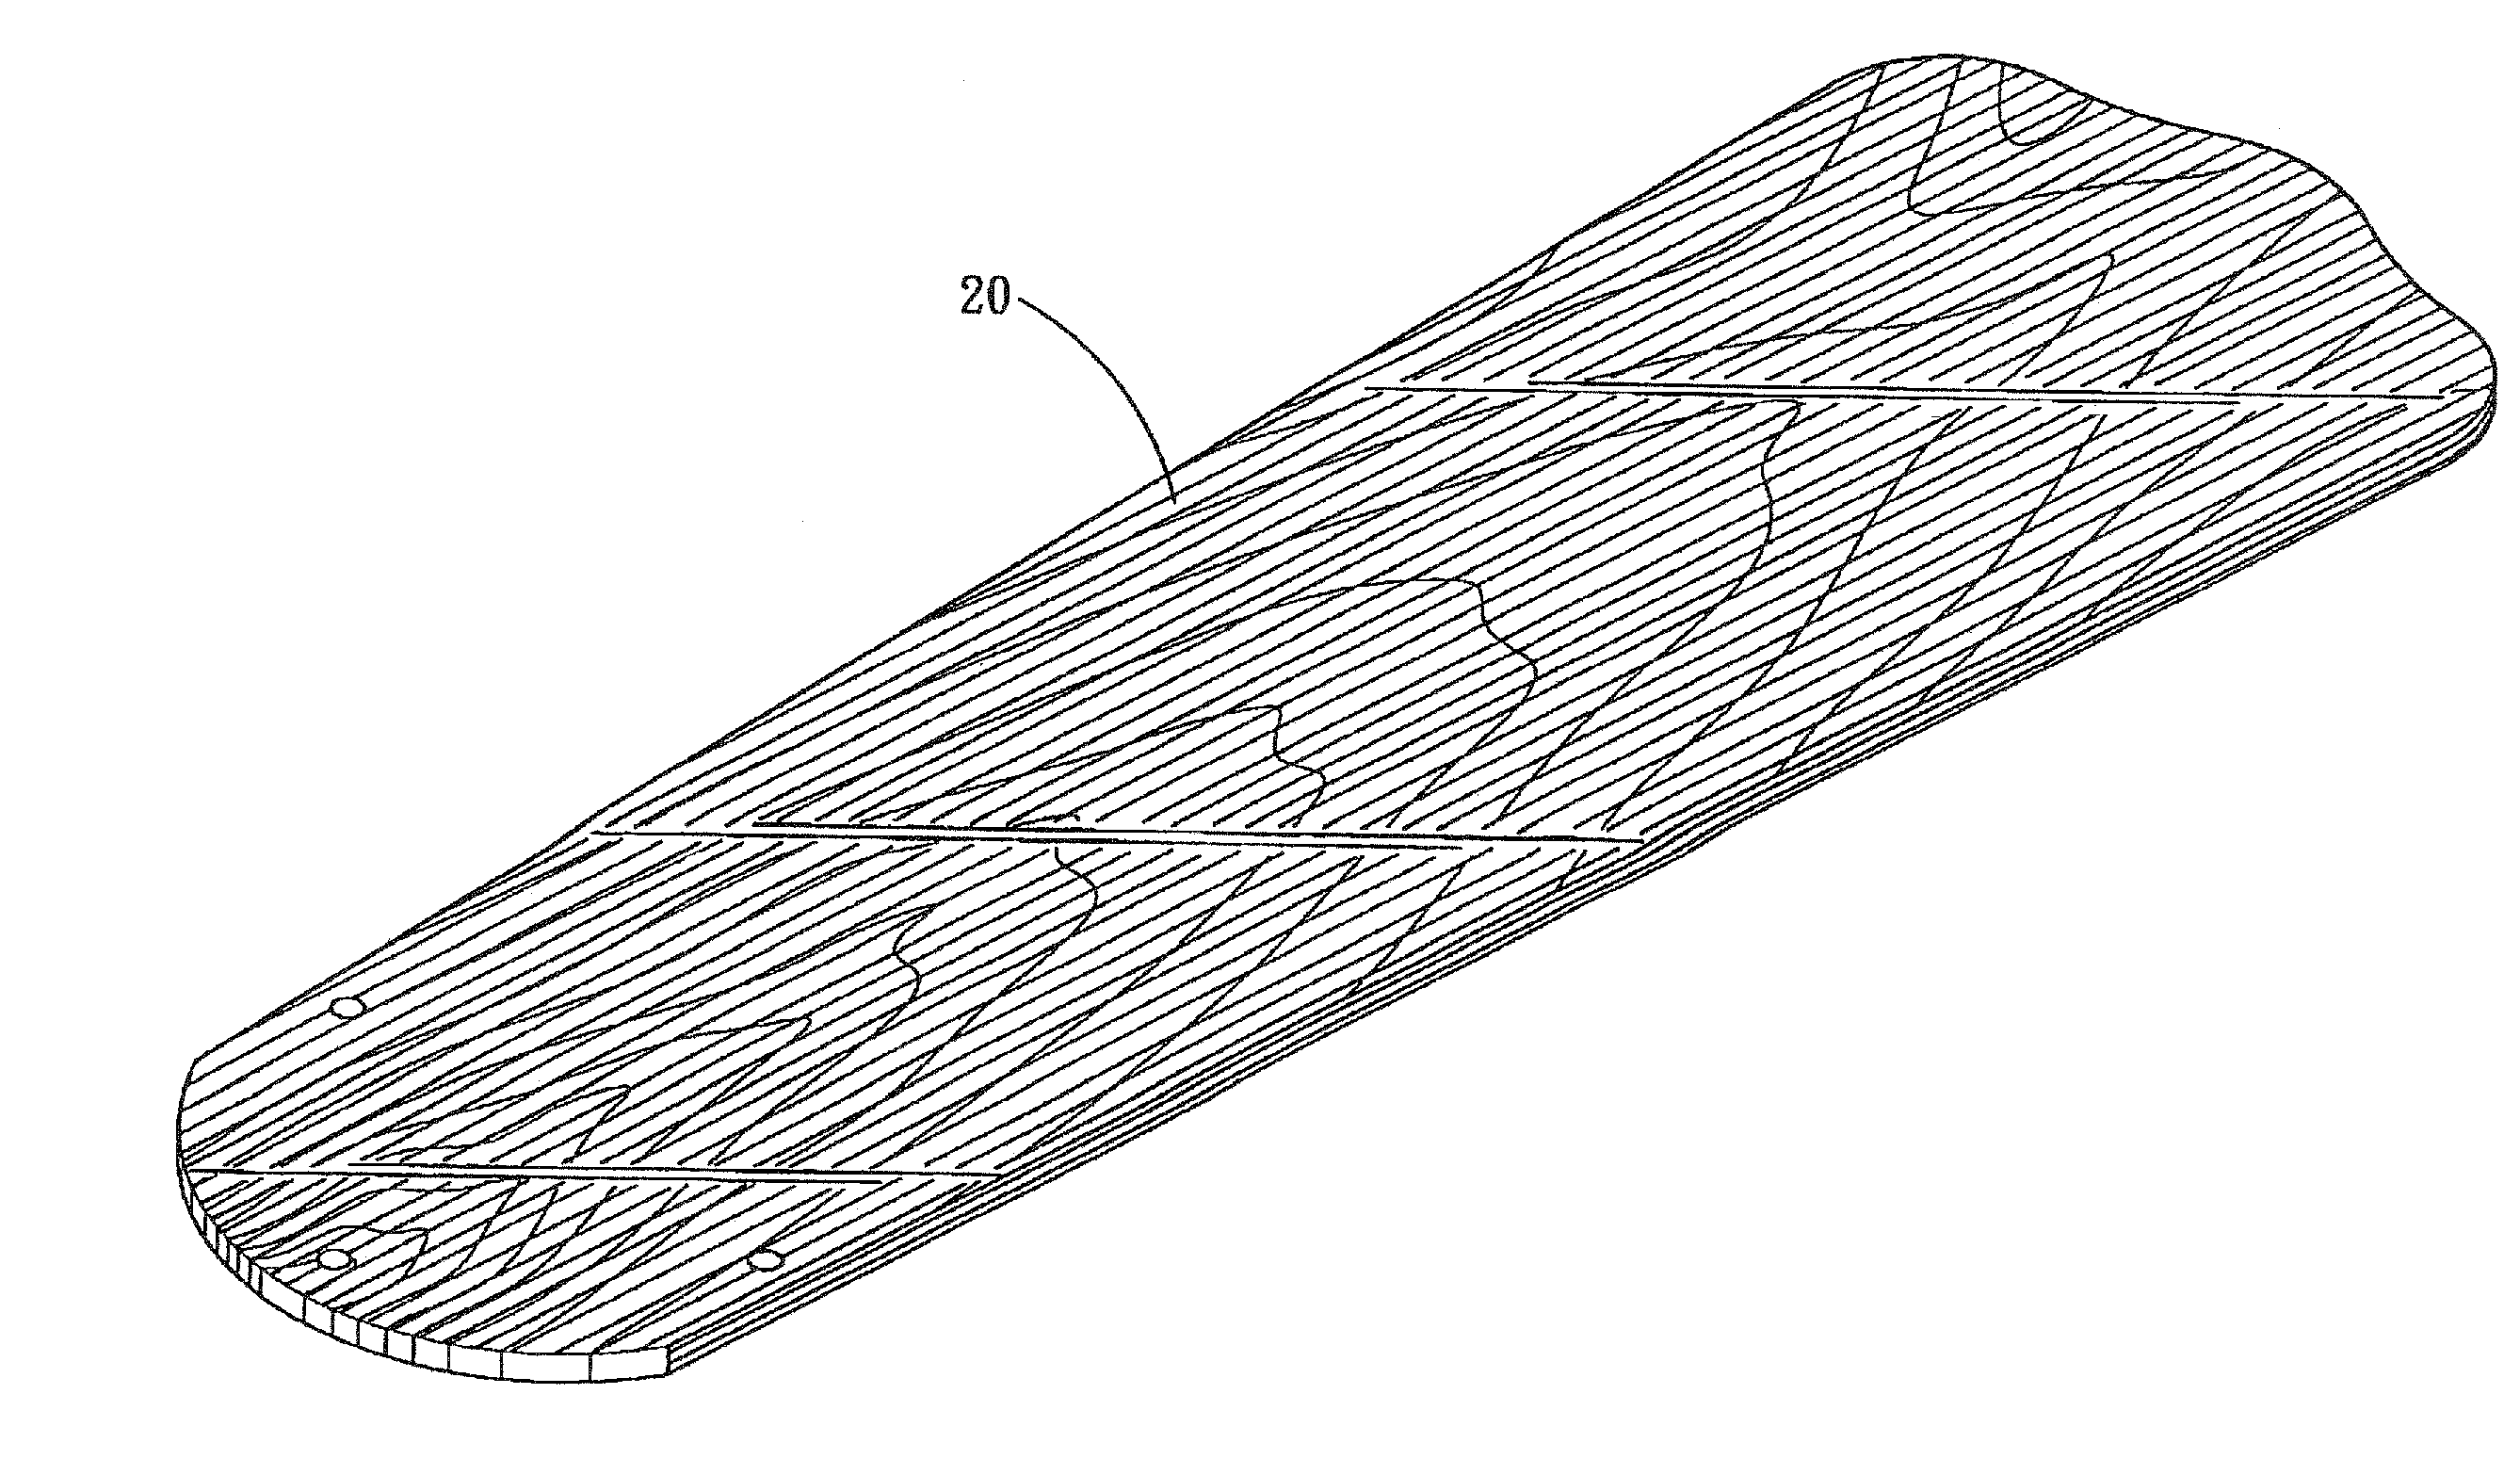 Method of manufacturing ceiling fan blades